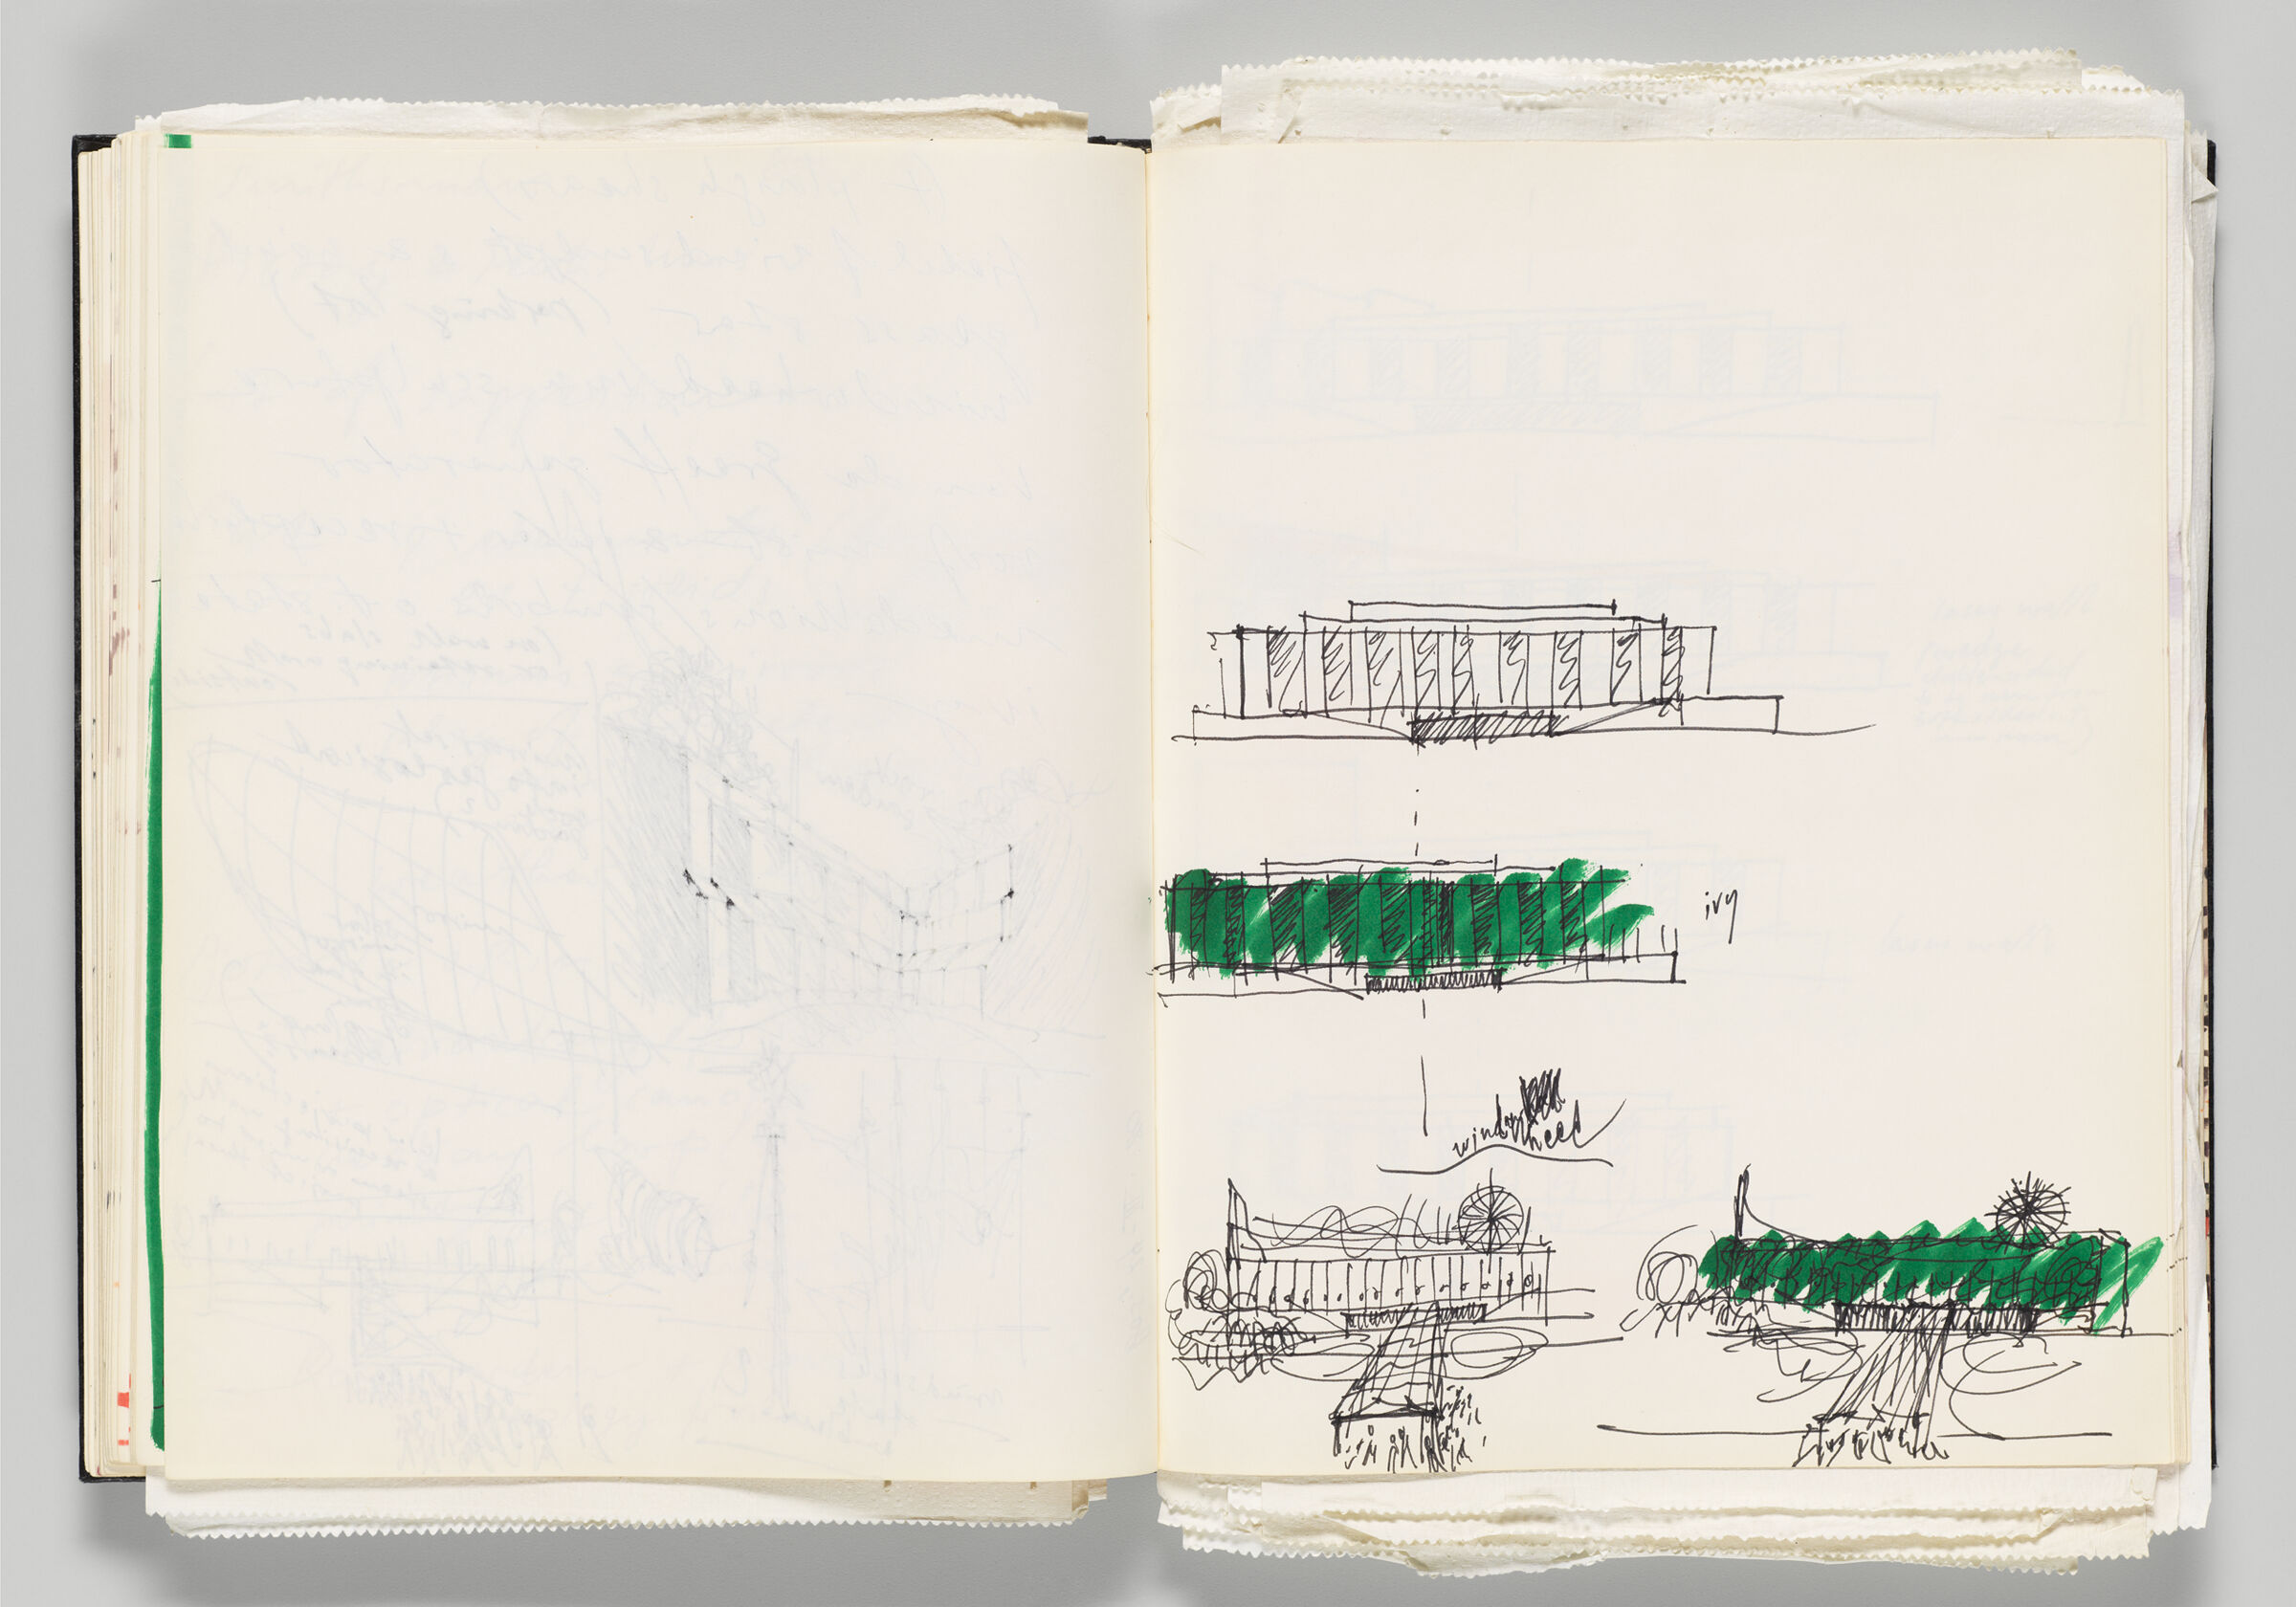 Untitled (Bleed-Through Of Previous Page, Left Page); Untitled (Sketches Of Ivy Installation And Wind Wheel, Right Page)